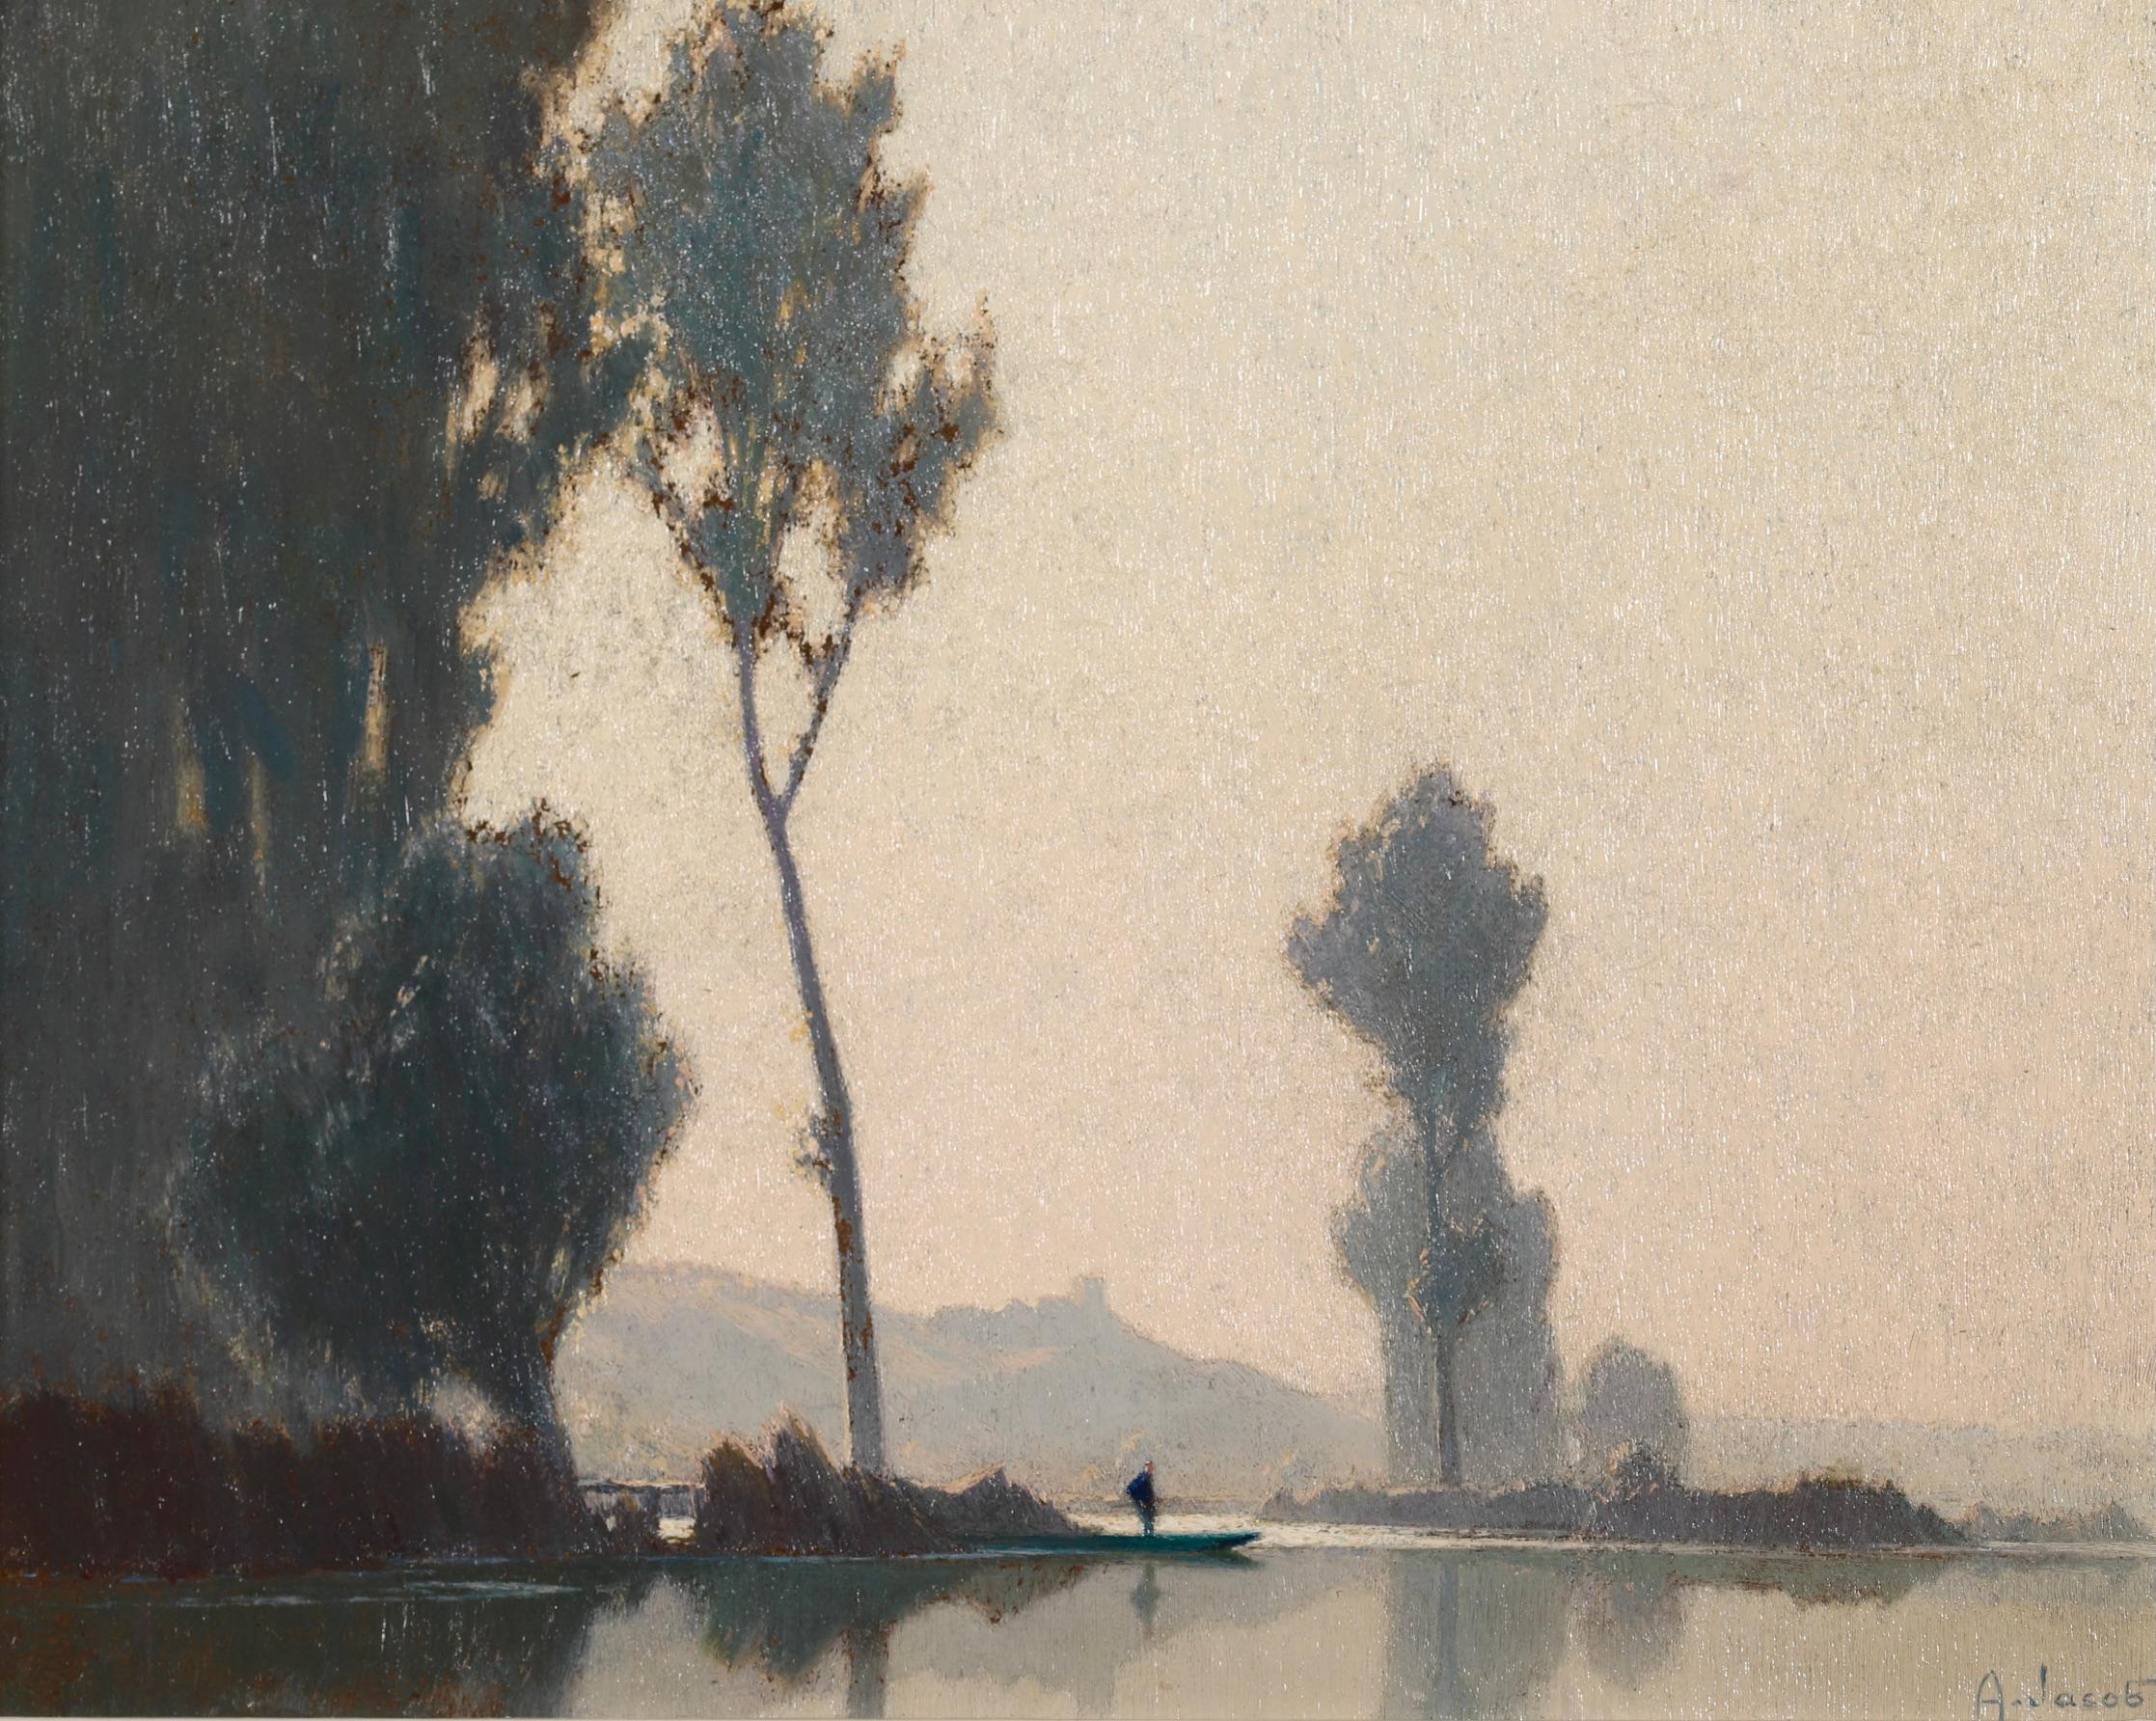 Signed oil on canvas landscape circa 1930 by popular French impressionist painter Alexandre Louis Jacob. The piece depicts a fisherman in a small boat by the bank of the River Seine early on a misty morning. 

Signature:
Signed lower